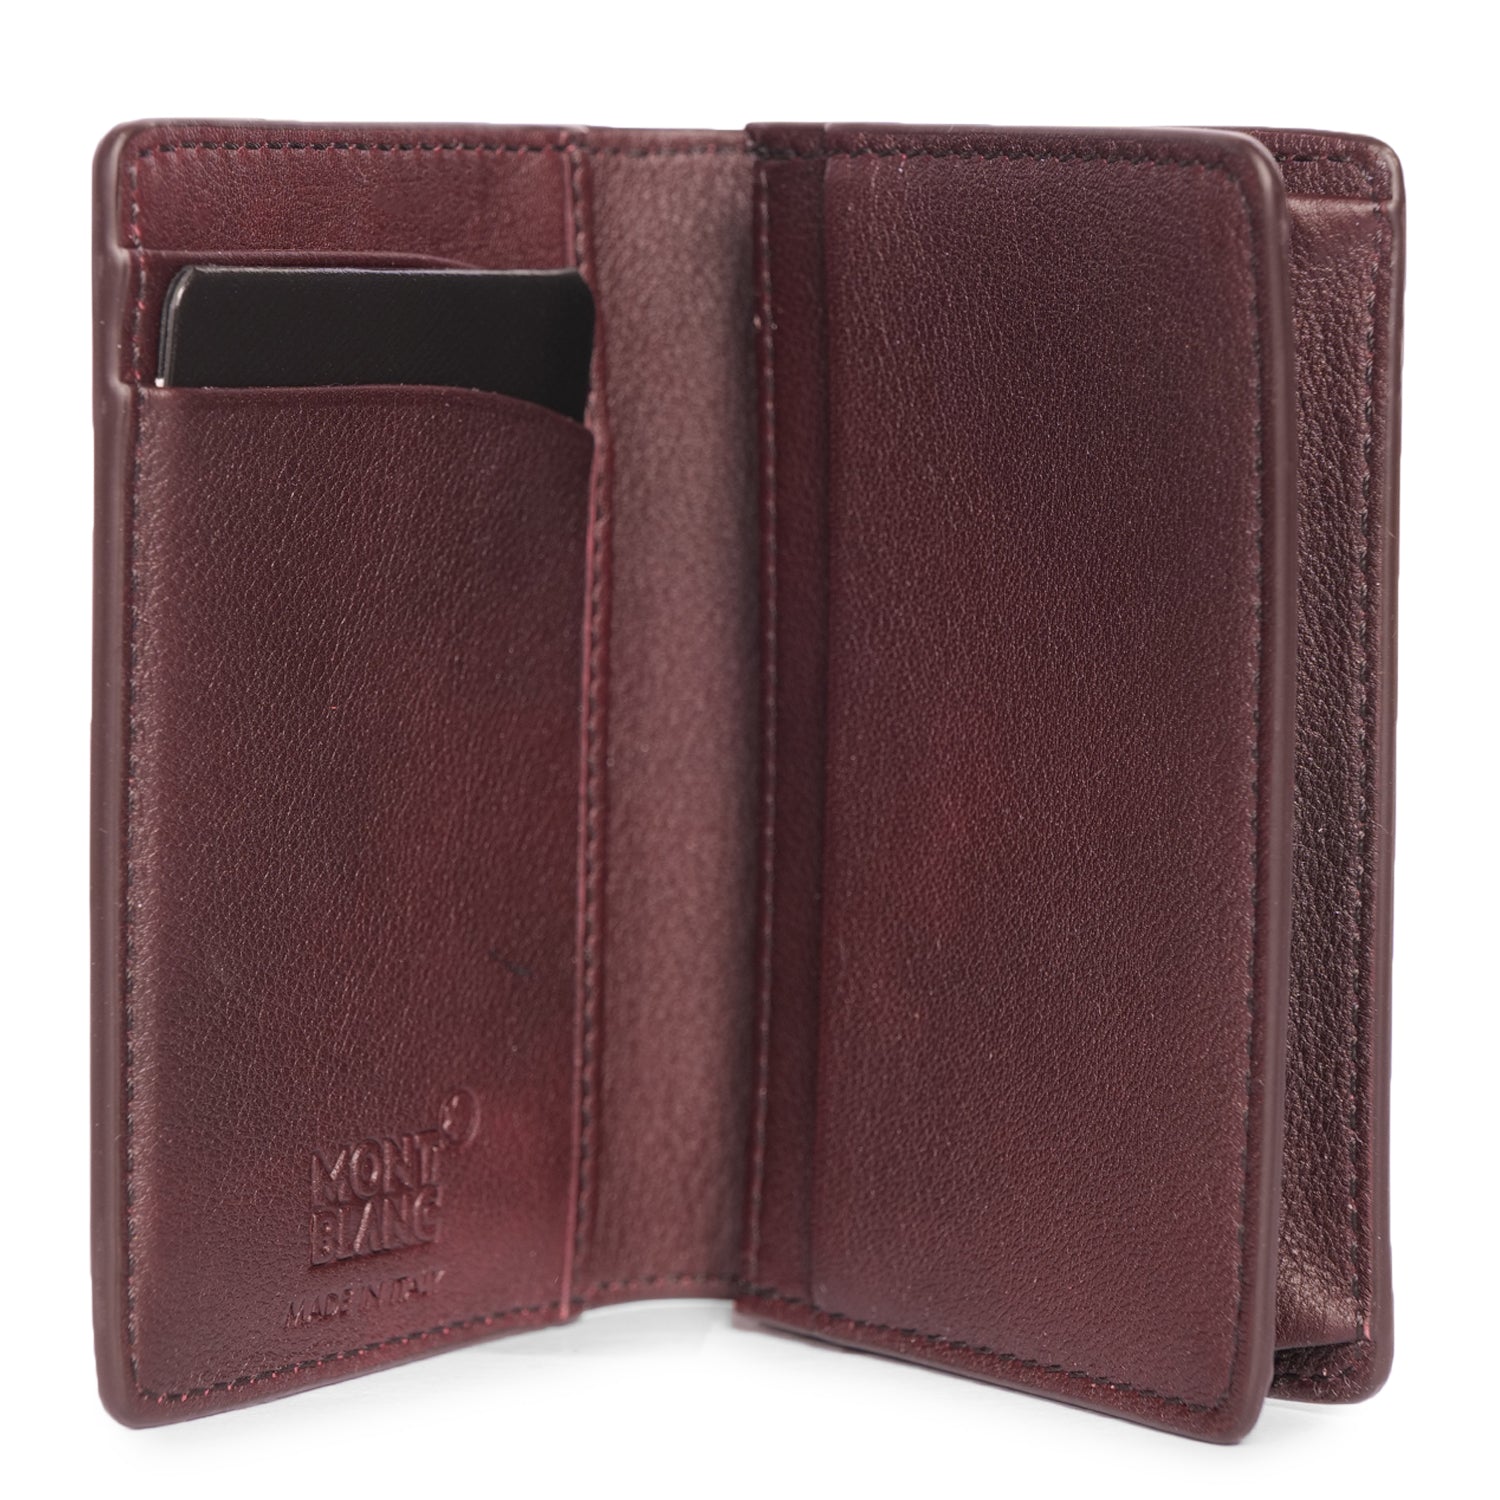 MONT BLANC LEATHER BUSINESS CARD HOLDER IN BURGUNDY